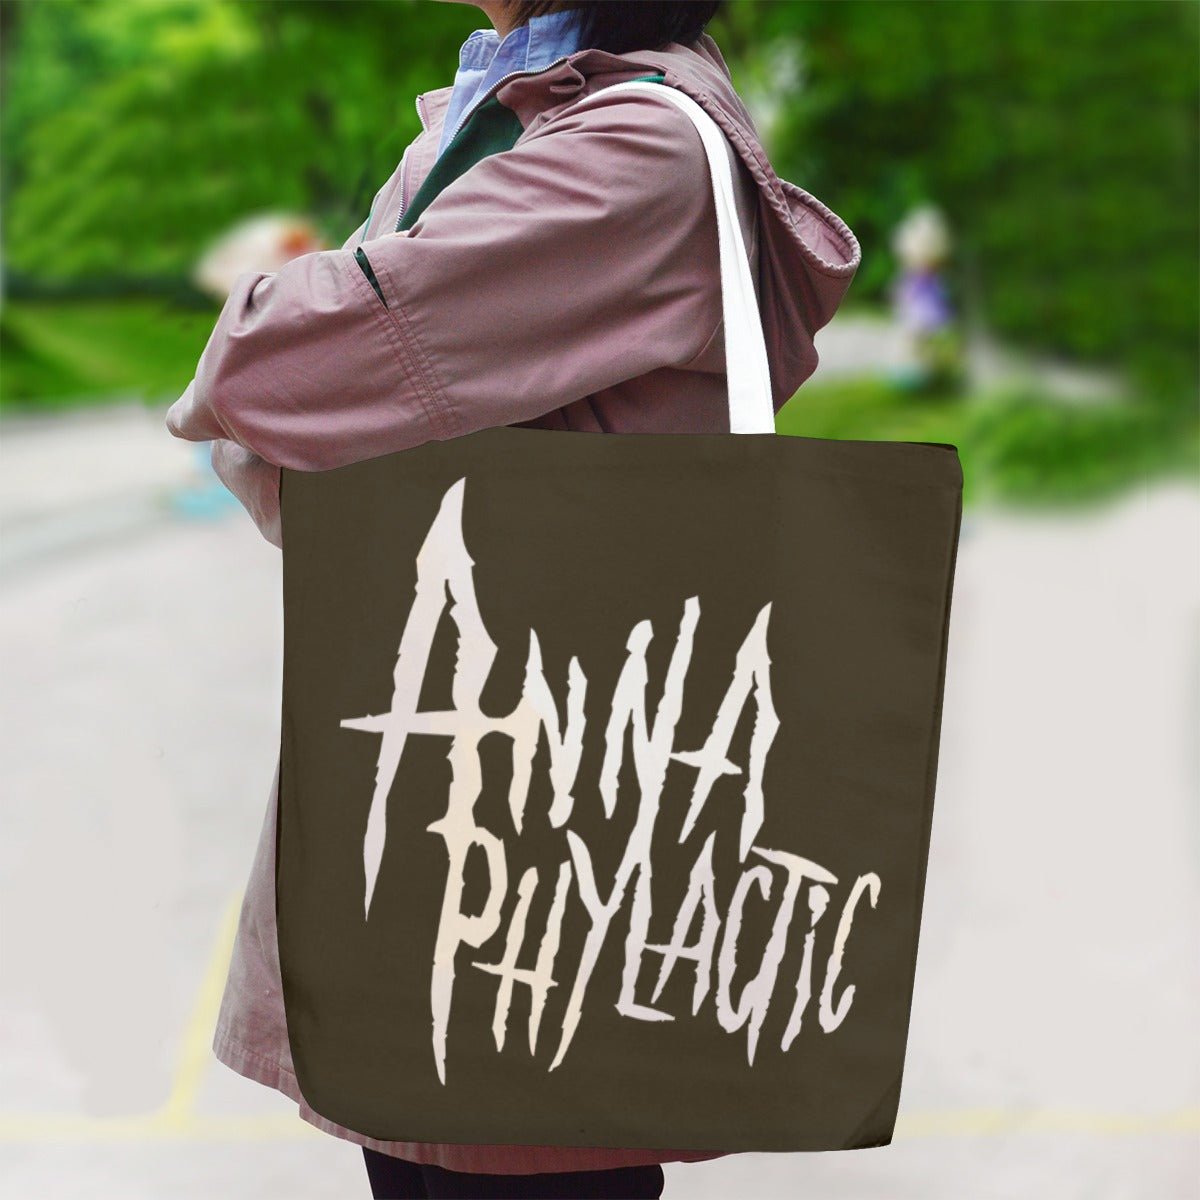 Anna Phylactic - Logo Canvas Tote Bag - dragqueenmerch